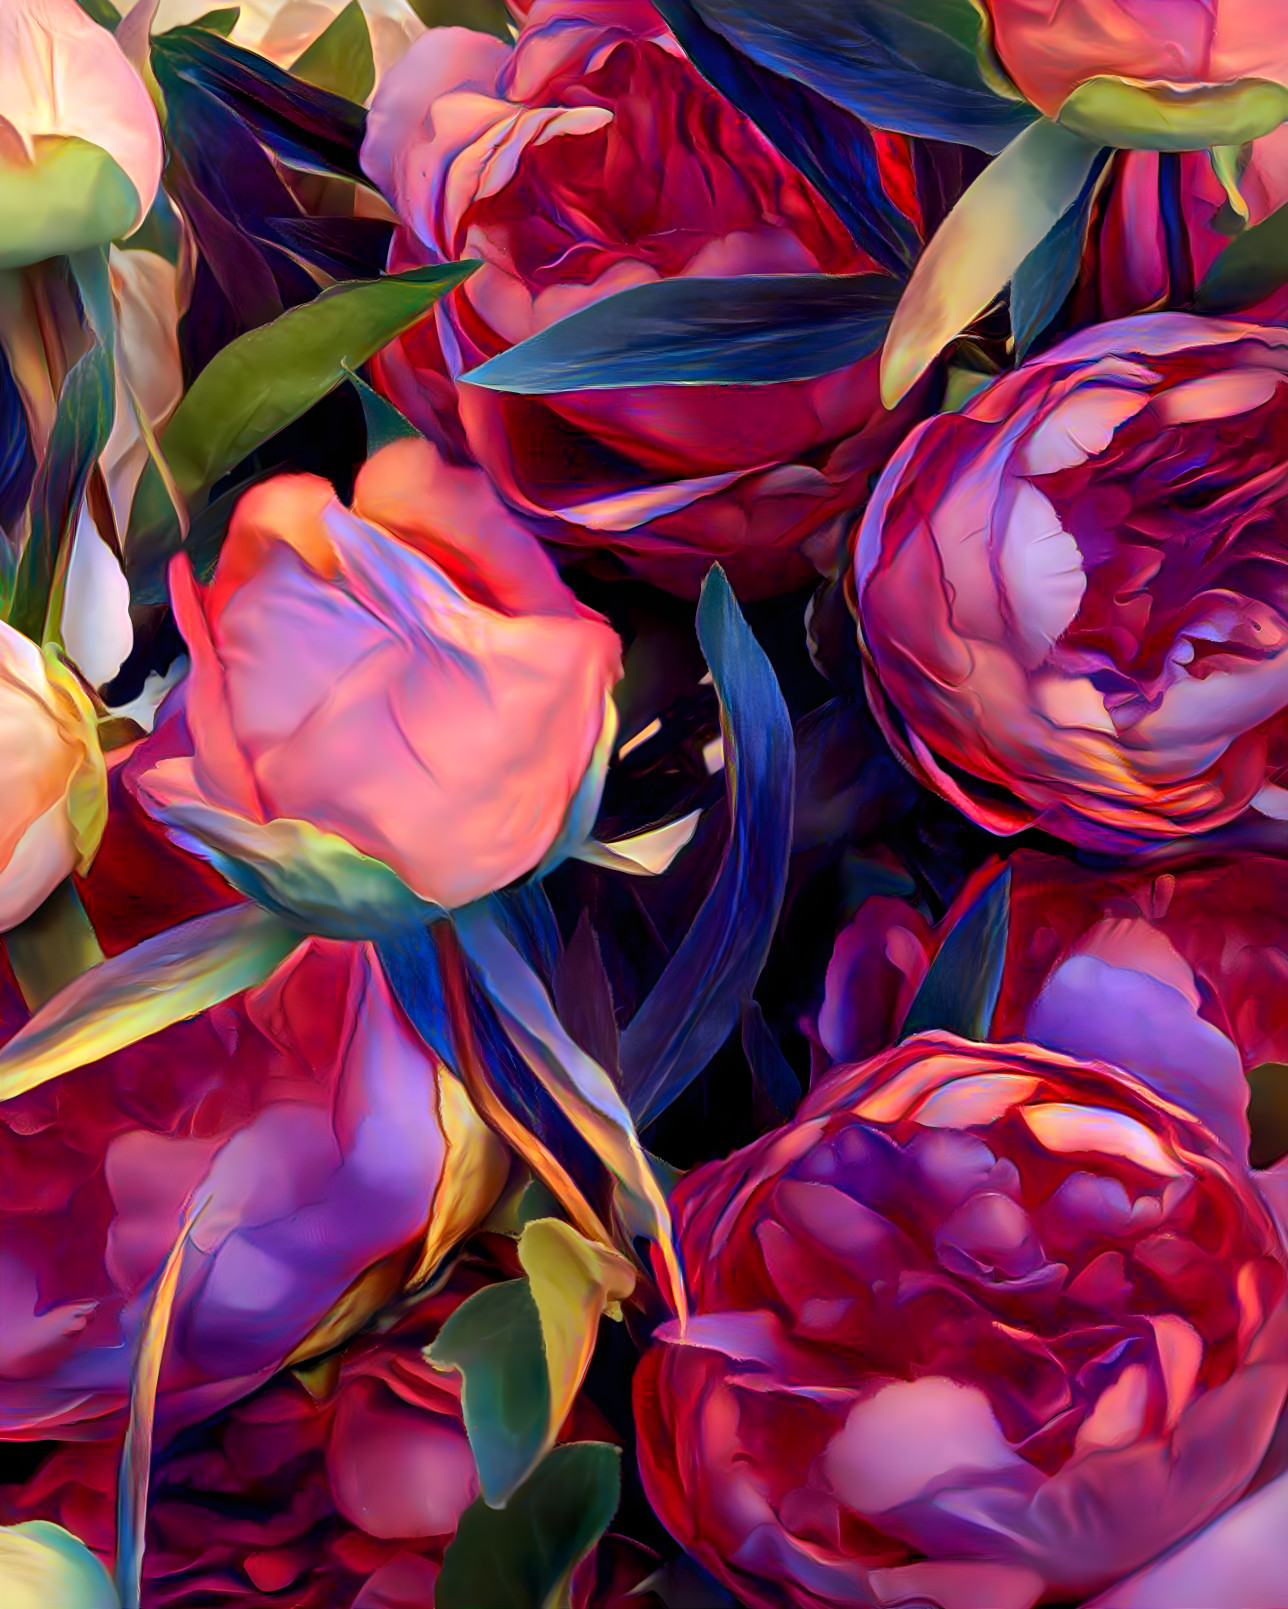 Colorful Peonies [FHD]